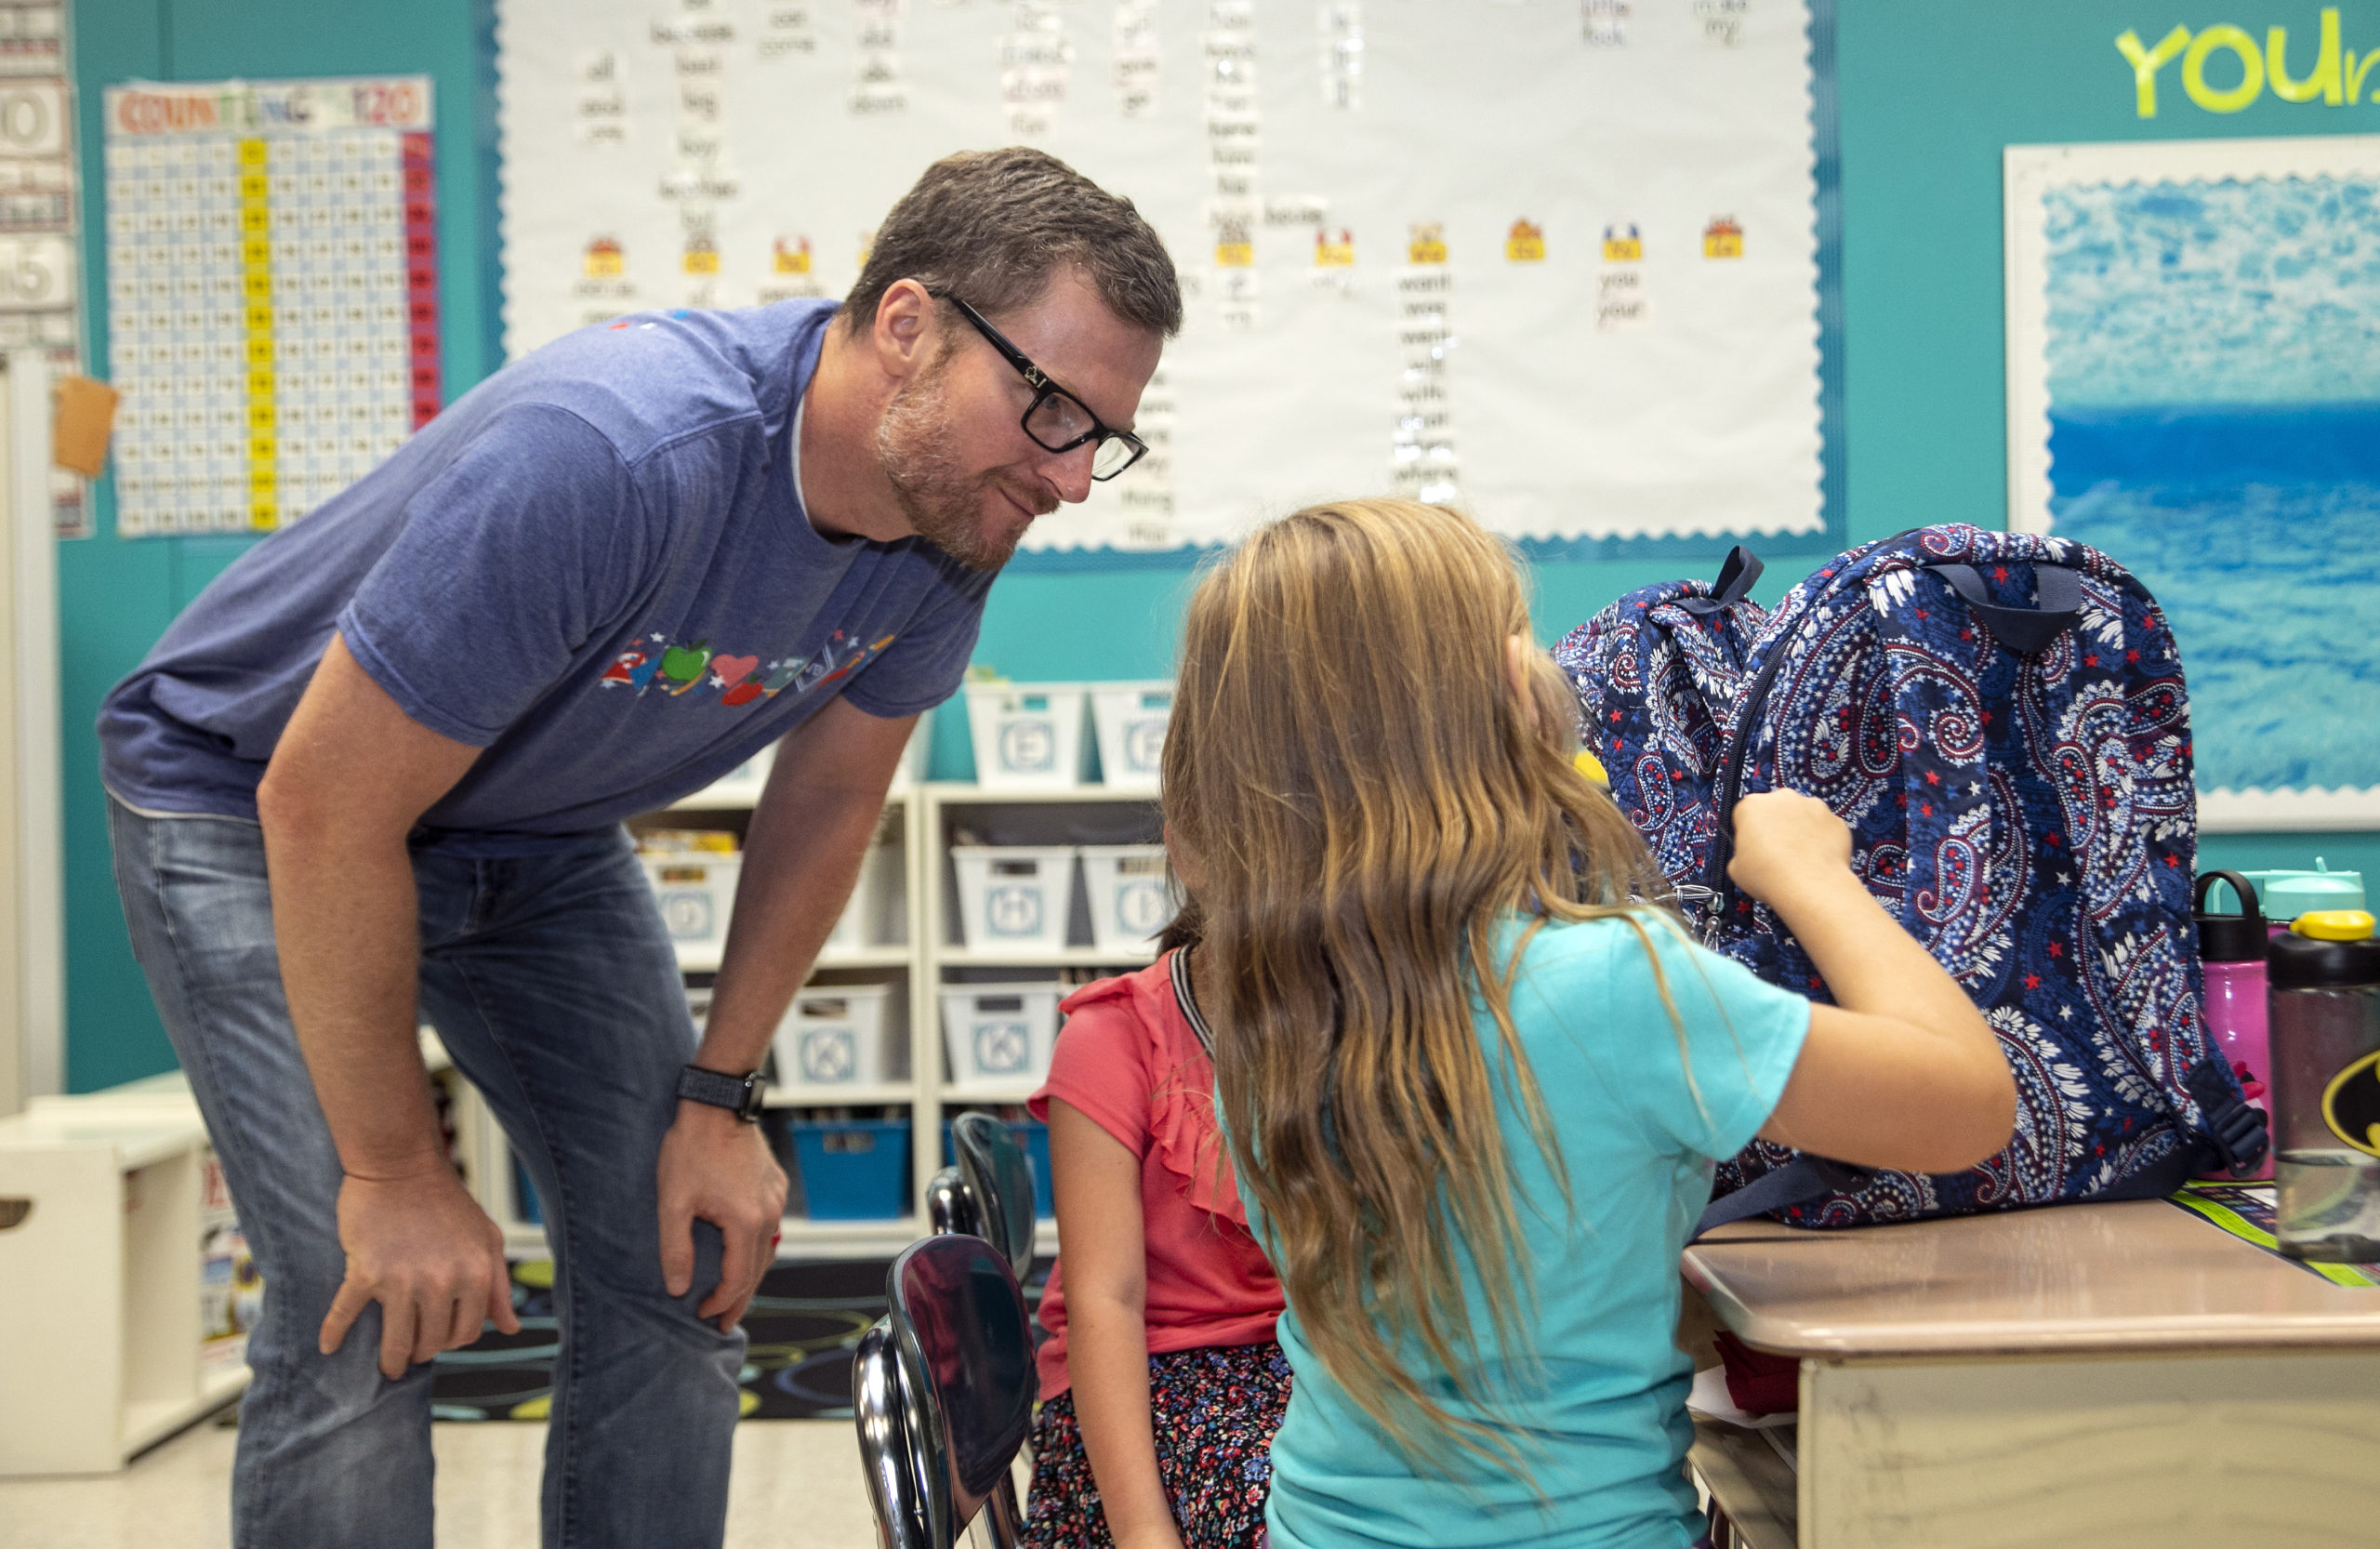 Dale Earnhardt Jr. surprises students for the Vera Bradley x Blessings In A Backpack Event at Shepherd Elementary on September 16, 2019 in Mooresville, North Carolina. (Photo by Jeff Hahne/Getty Images for Vera Bradley)